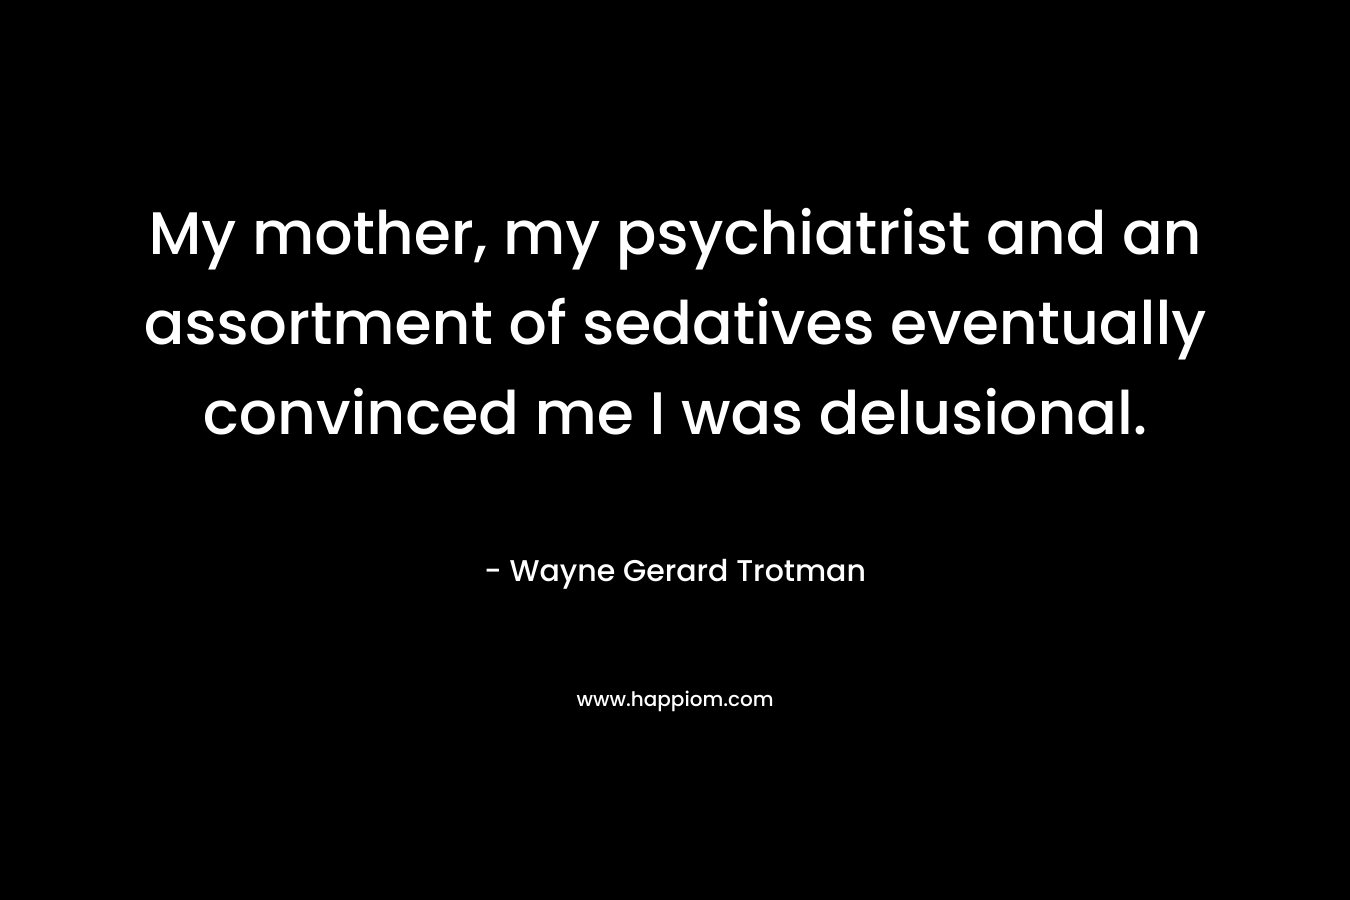 My mother, my psychiatrist and an assortment of sedatives eventually convinced me I was delusional.